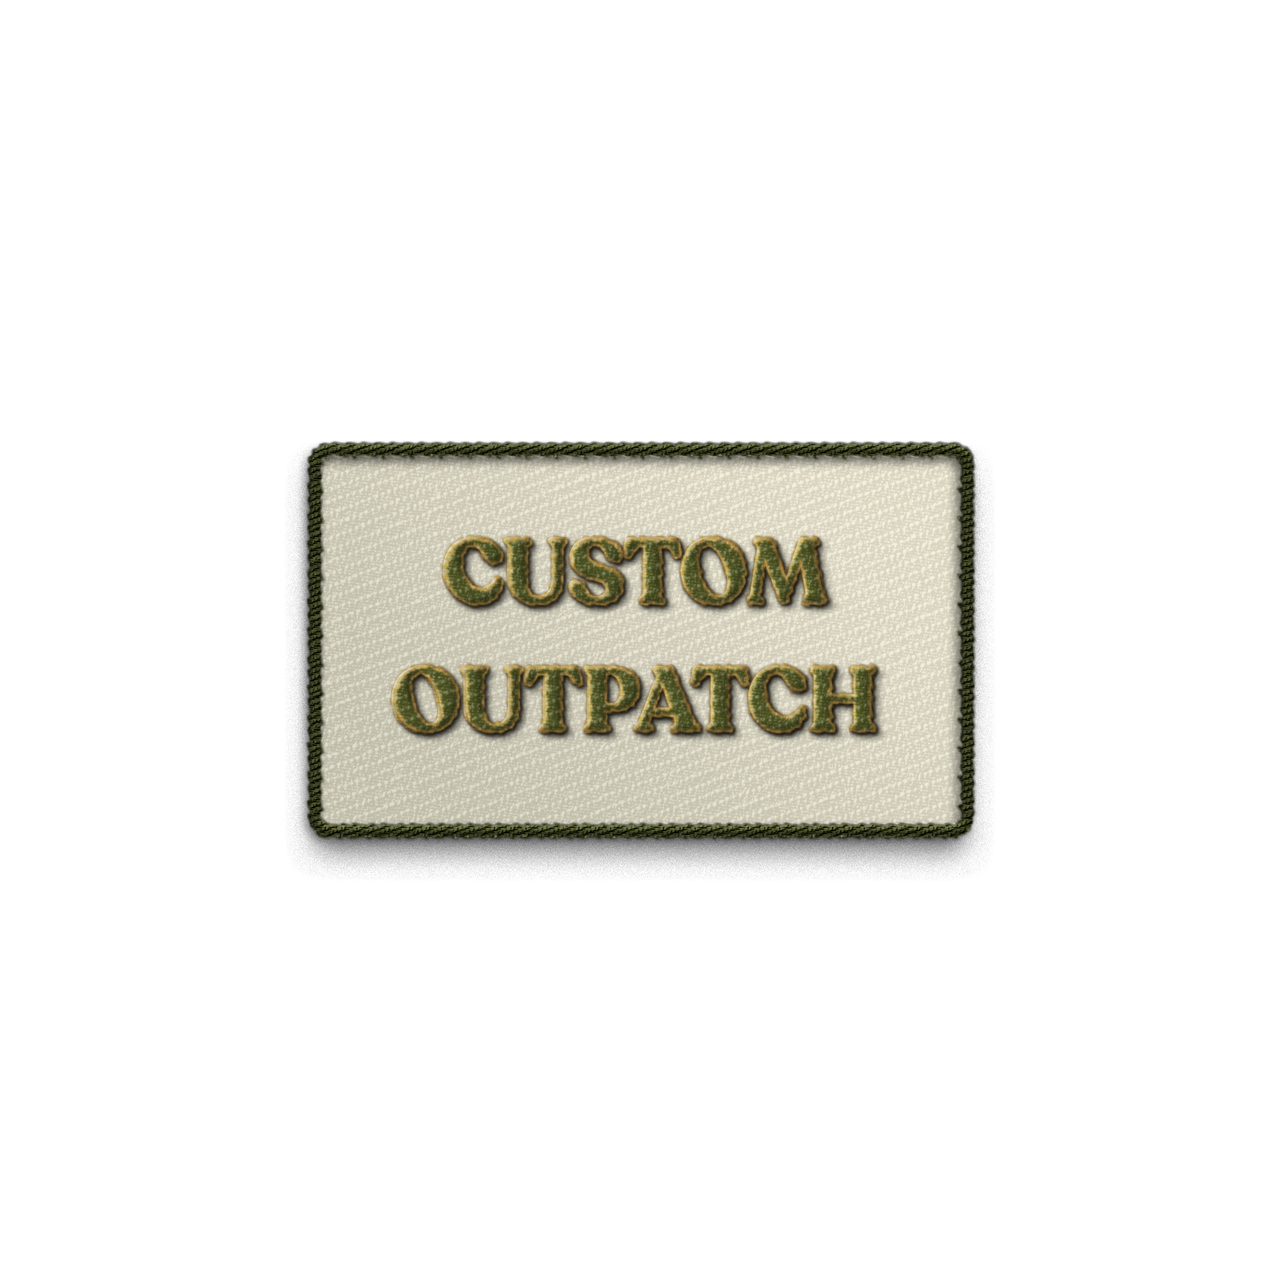 Custom Velcro Patch, sacrifices must be made 